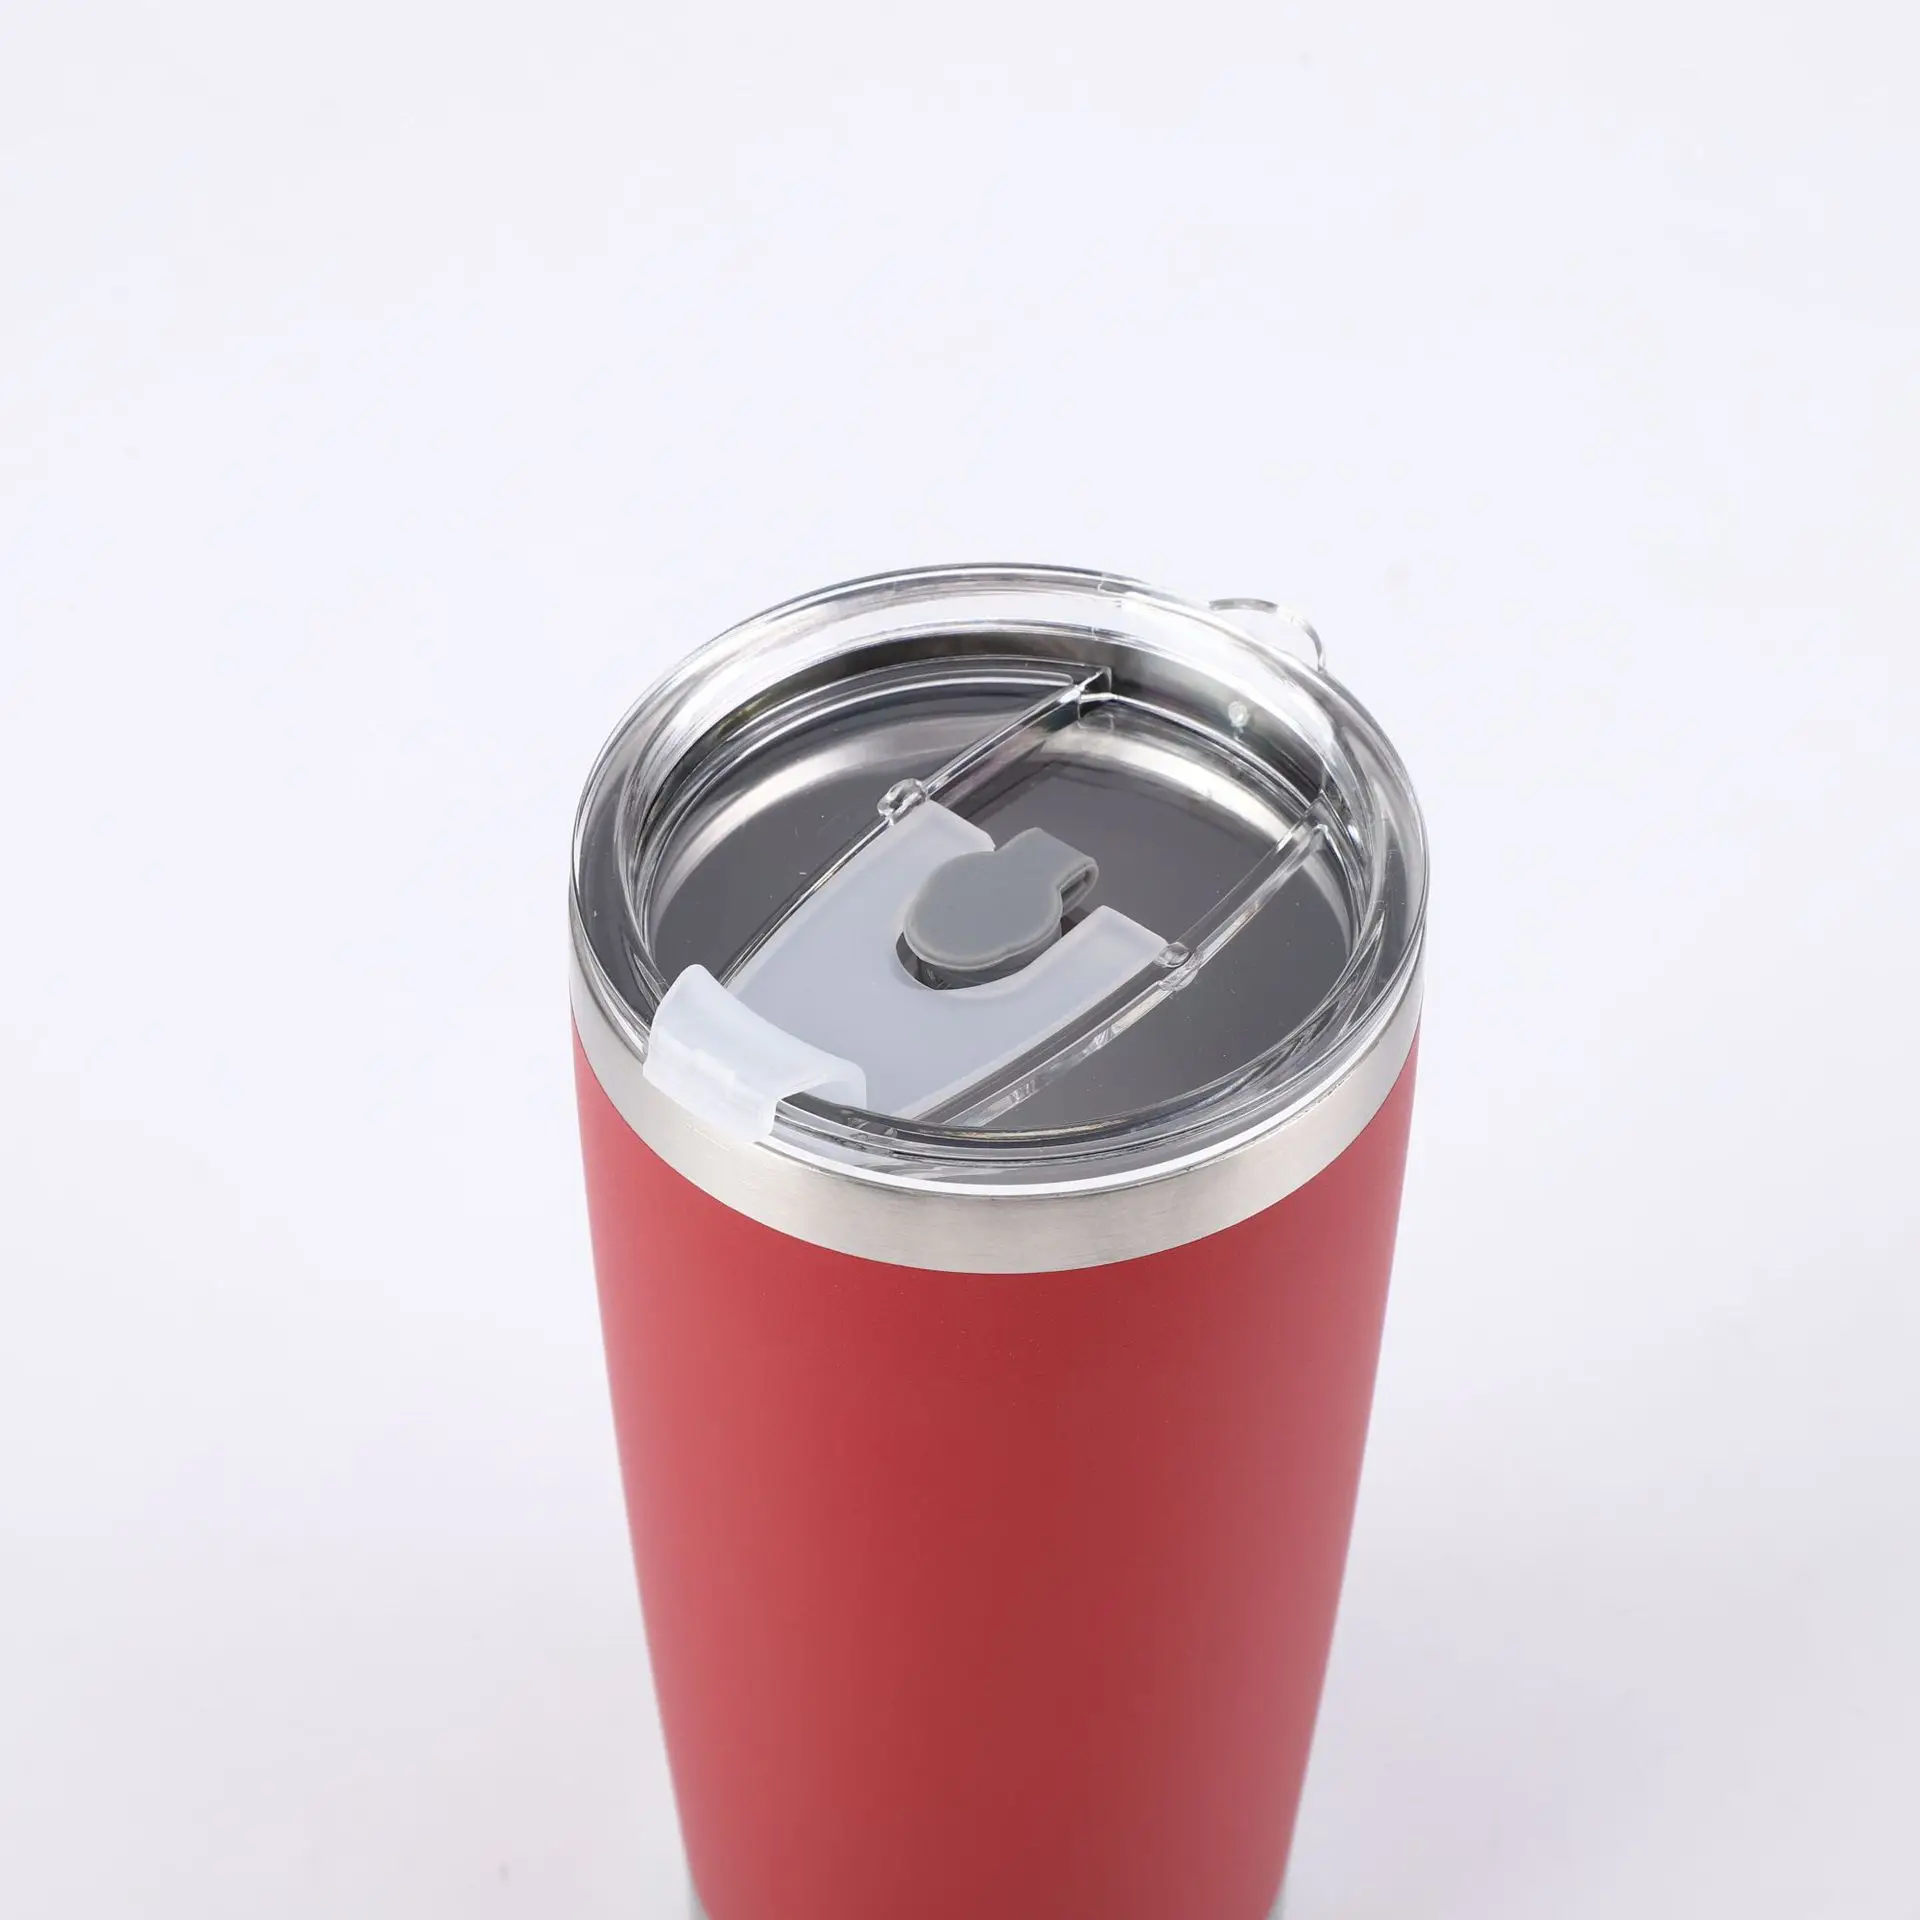 20oz vacuum insulated double wall Stainless Steel 304 powder coated tumbler coffee mug with yeticool magnetic slide lid